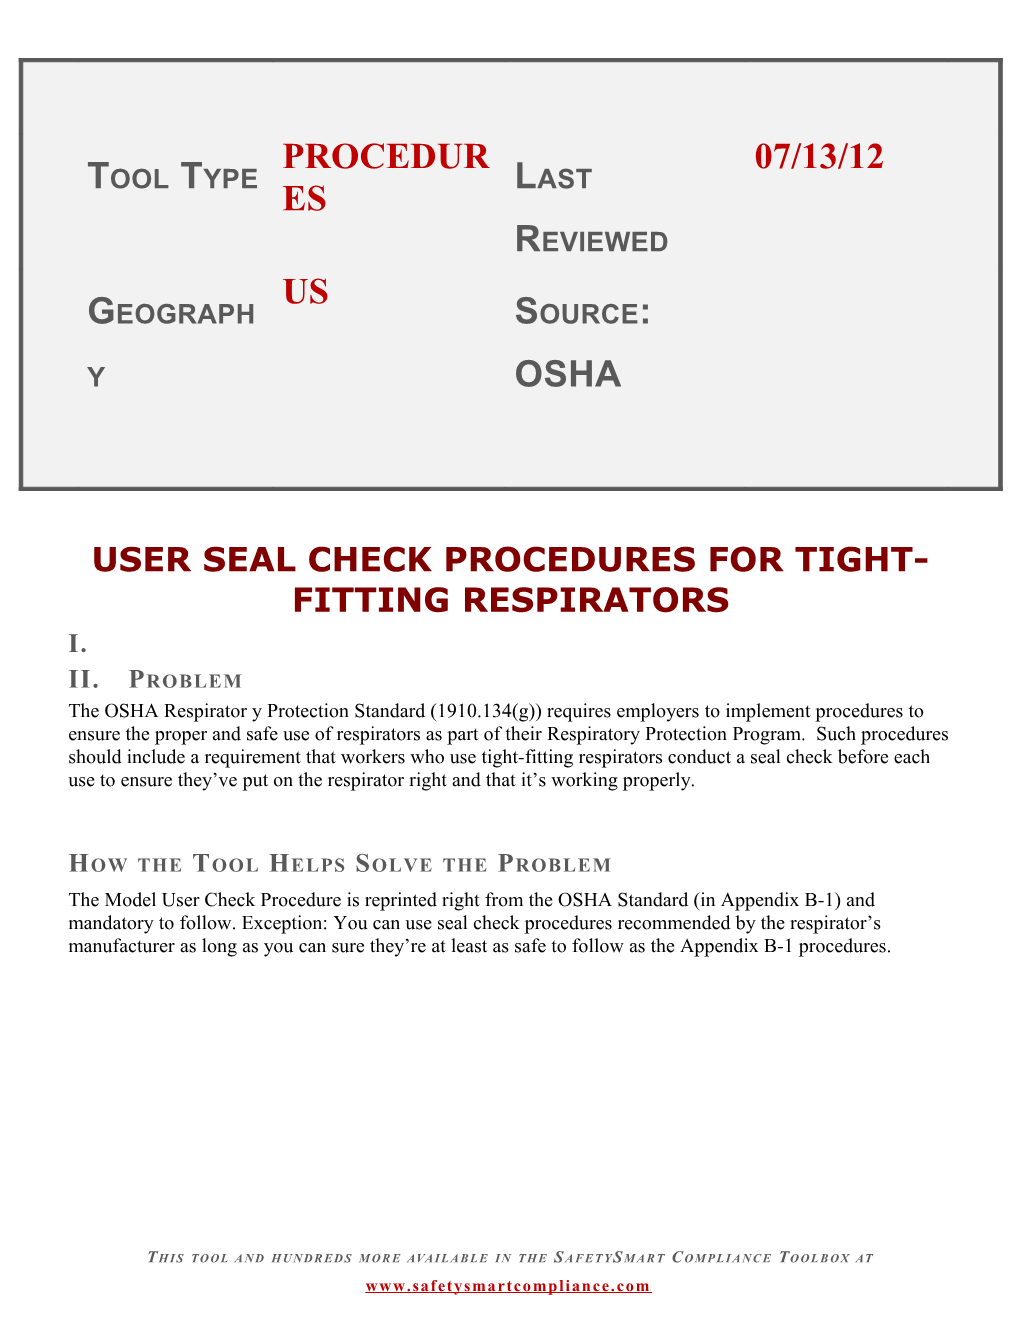 User Seal Check Procedures for Tight-Fitting Respirators